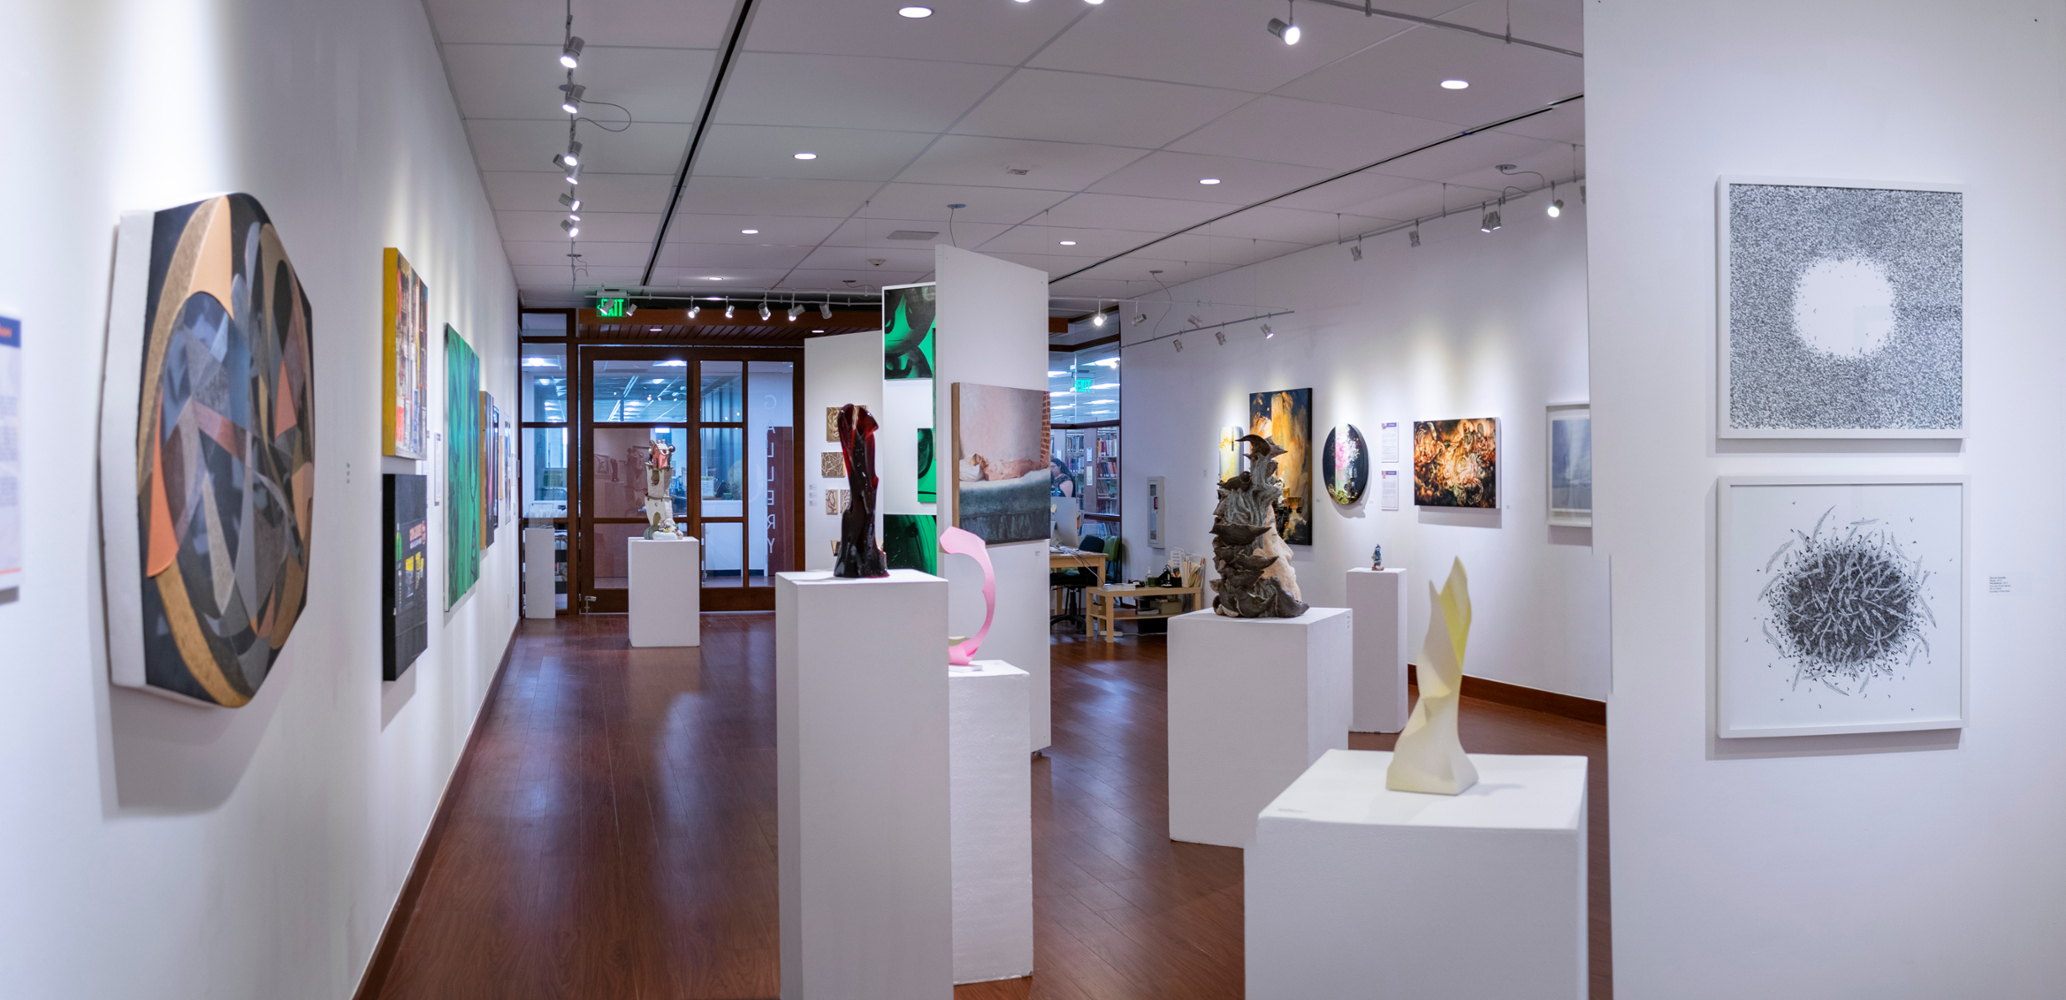 pano view of installations from back corner of gallery